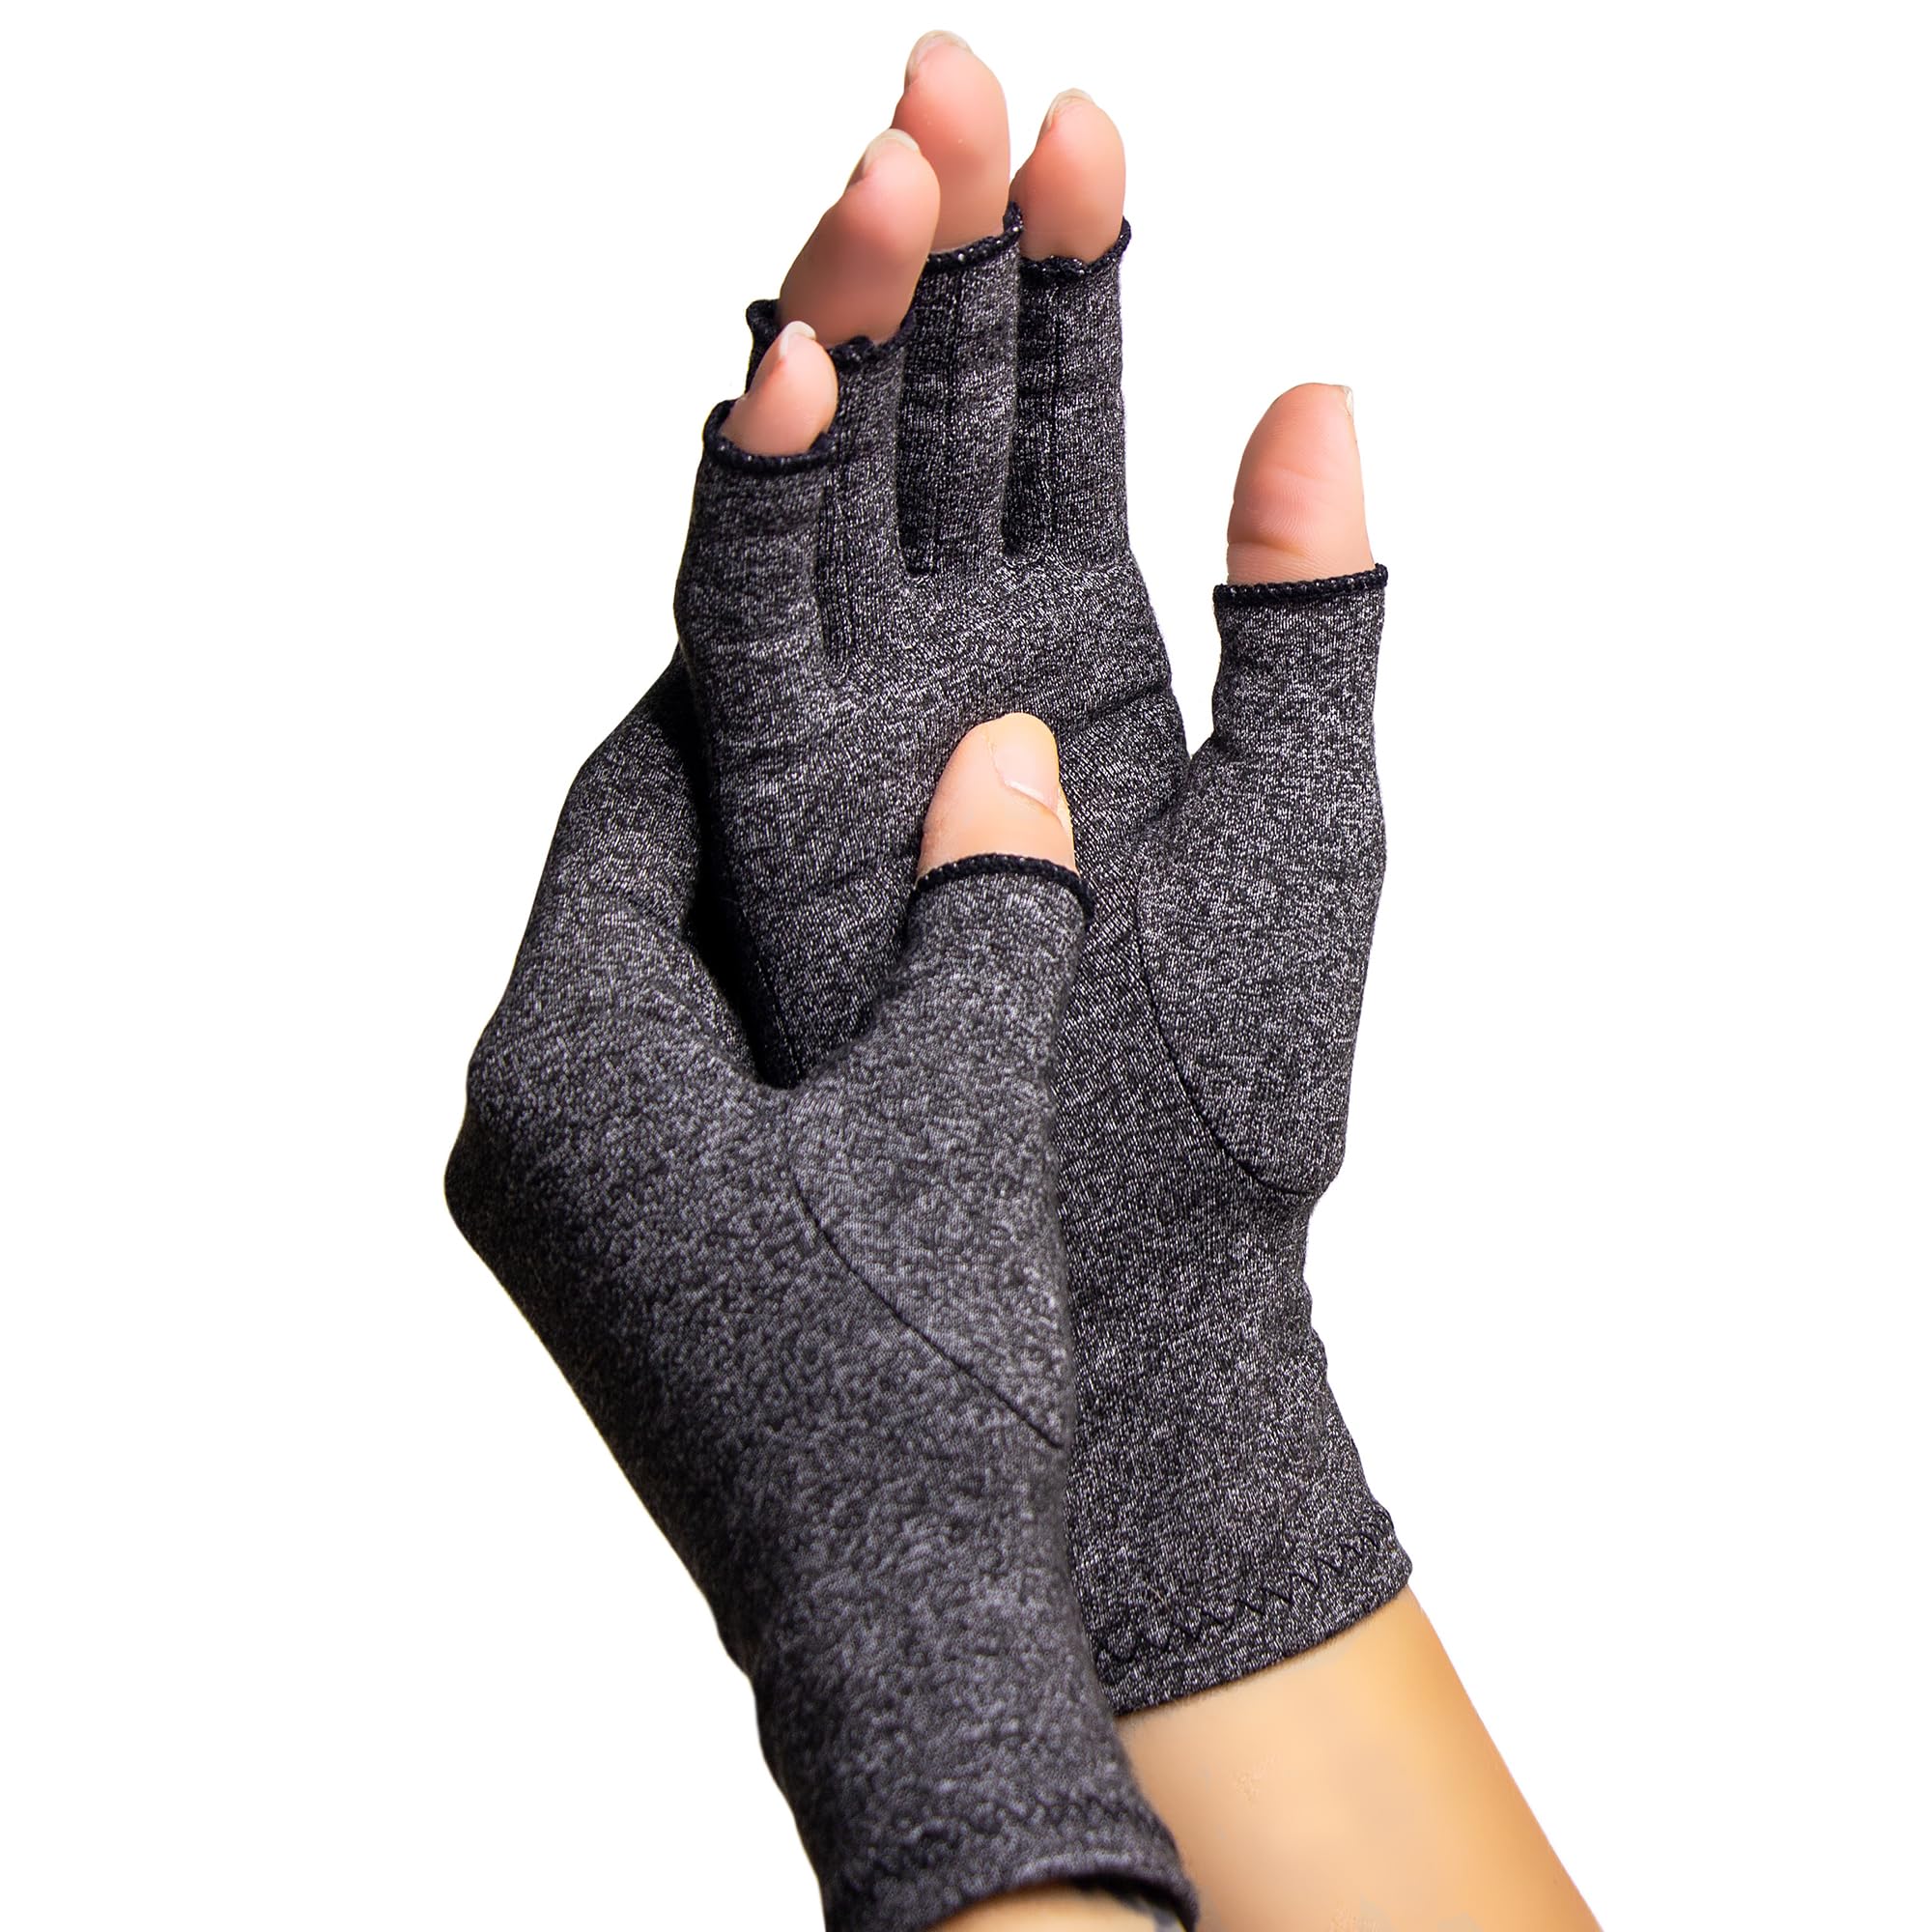 Heelbo Arthritis Compression Gloves for Pain Relief, Reduces Swelling & Stiffness, FSA & HSA Eligible, Fits Men & Women, Joint Pain Relief, Small